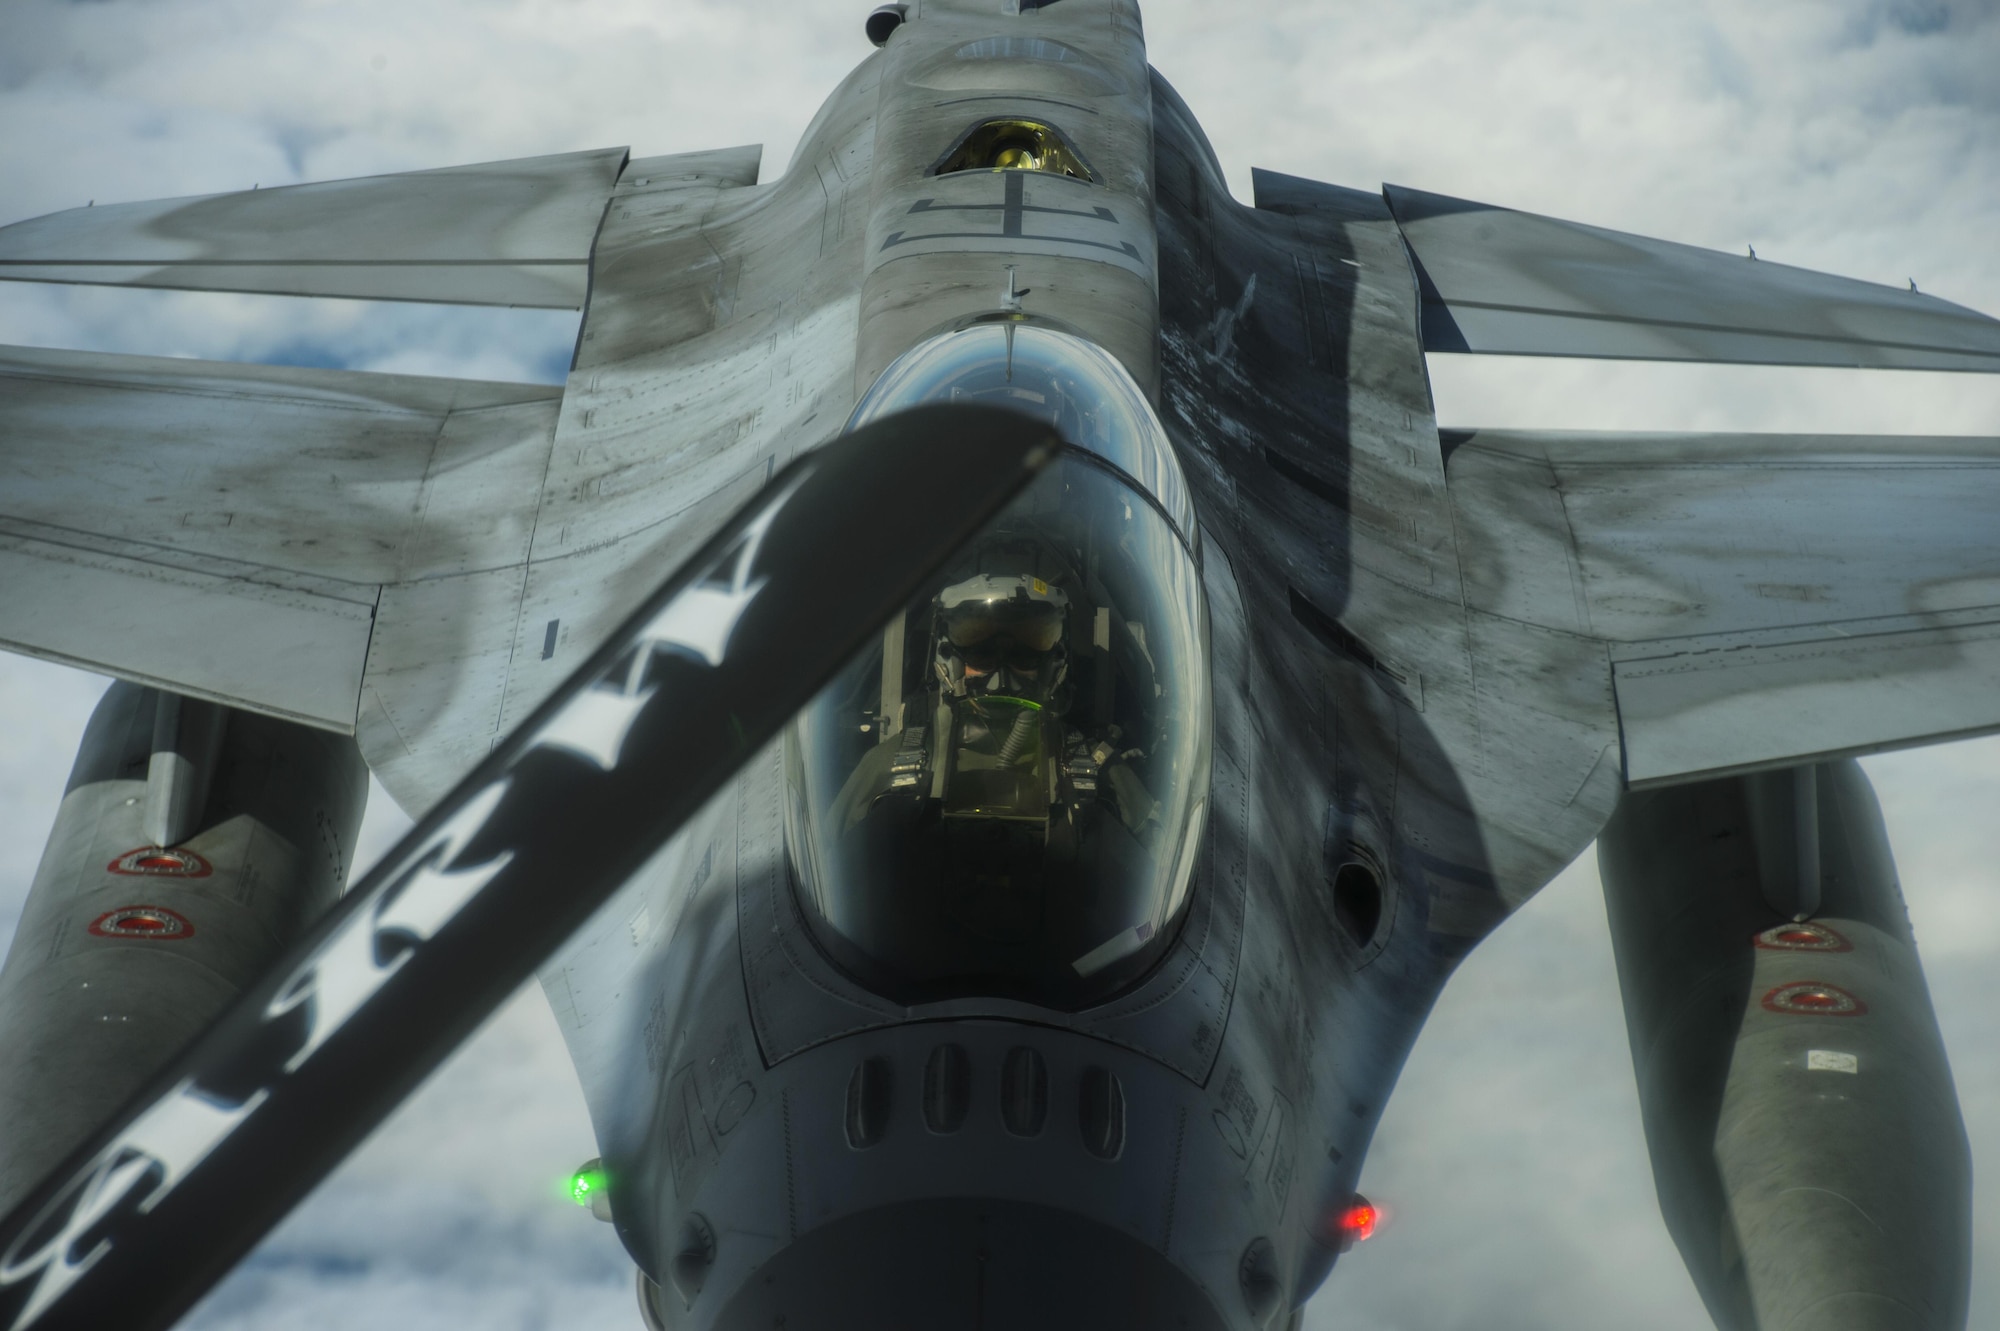 A Polish air force F-16 Fighting Falcon approaches the boom on a KC-135R Stratotanker during BALTOPS over the Baltic Sea, June 13, 2017. BALTOPS is an annually recurring multinational exercise designed to enhance flexibility and interoperability, as well as demonstrate resolve of allied and partner forces to defend the Baltic region. Participating nations include Belgium, Denmark, Estonia, Finland, France, Germany, Latvia, Lithuania, the Netherlands, Norway, Poland, Sweden, the United Kingdom, and the United States. (U.S. Air Force photo by Staff Sgt. Jonathan Snyder)